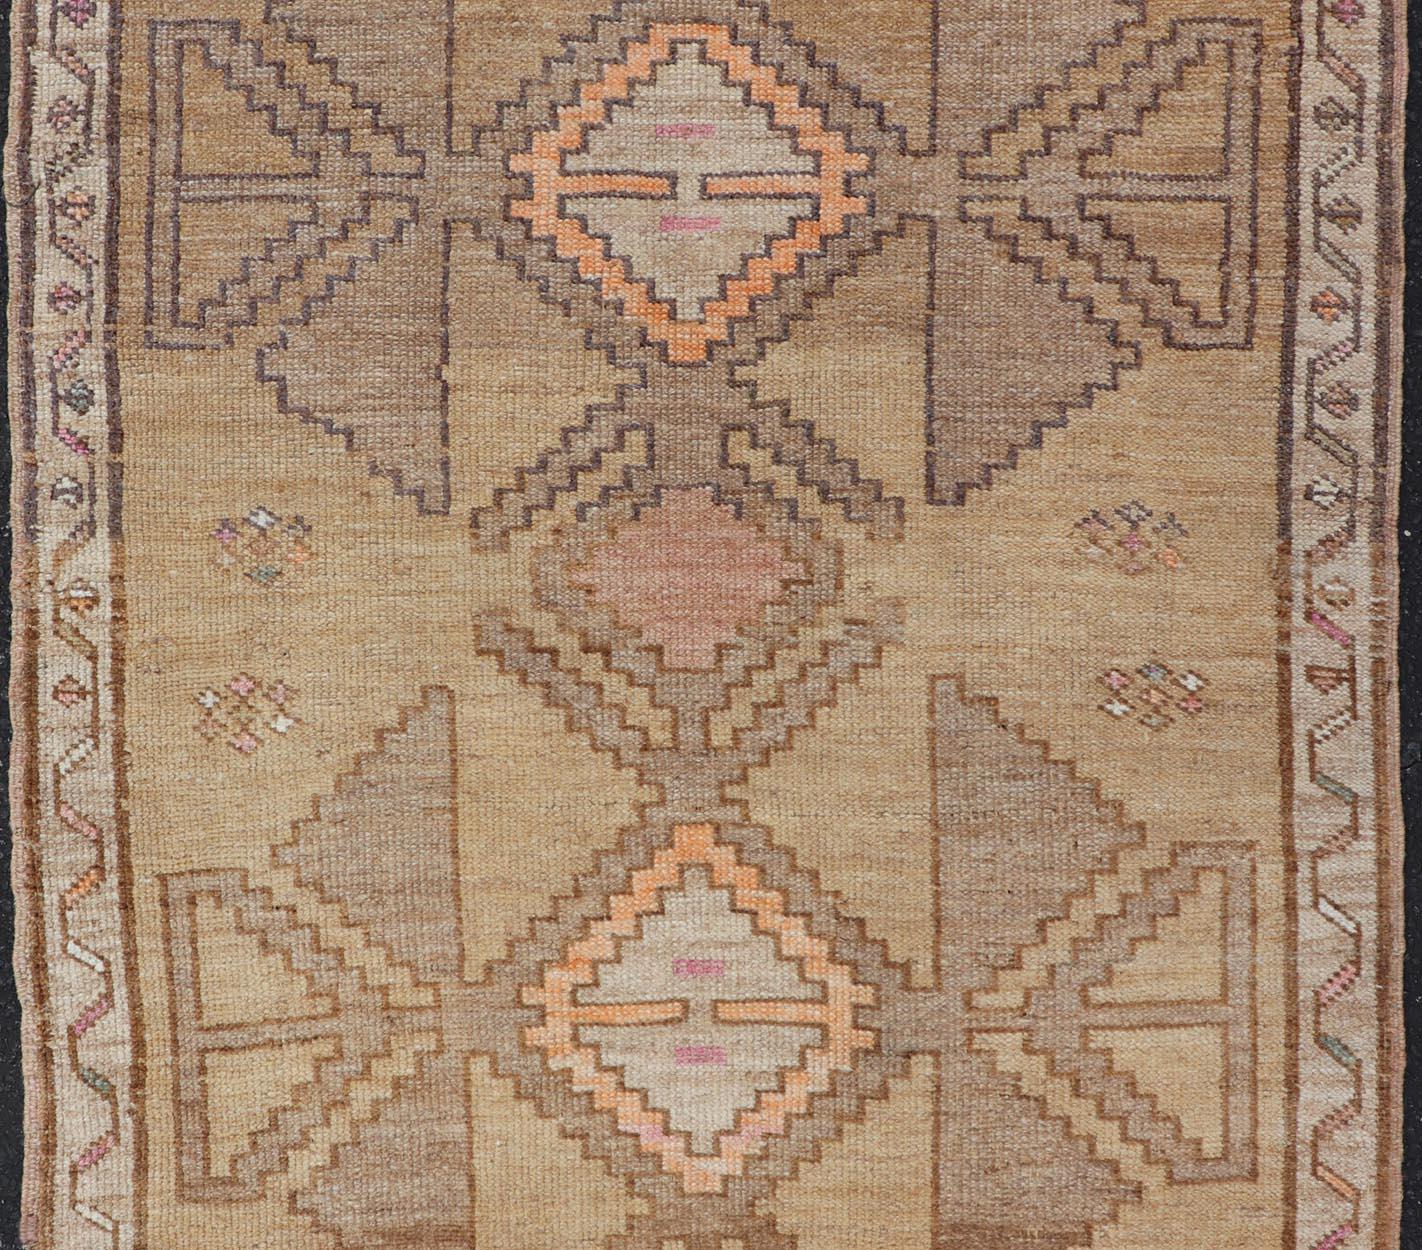 Colorful Turkish Kars with Tribal Medallion Designs and Geometric Motifs. Vintage Turkish in brown background and taupe border with accent colors, ornage, tan, cream, brown, and taupe. Keivan Woven Arts / rug /EN-15296, country of origin / type: